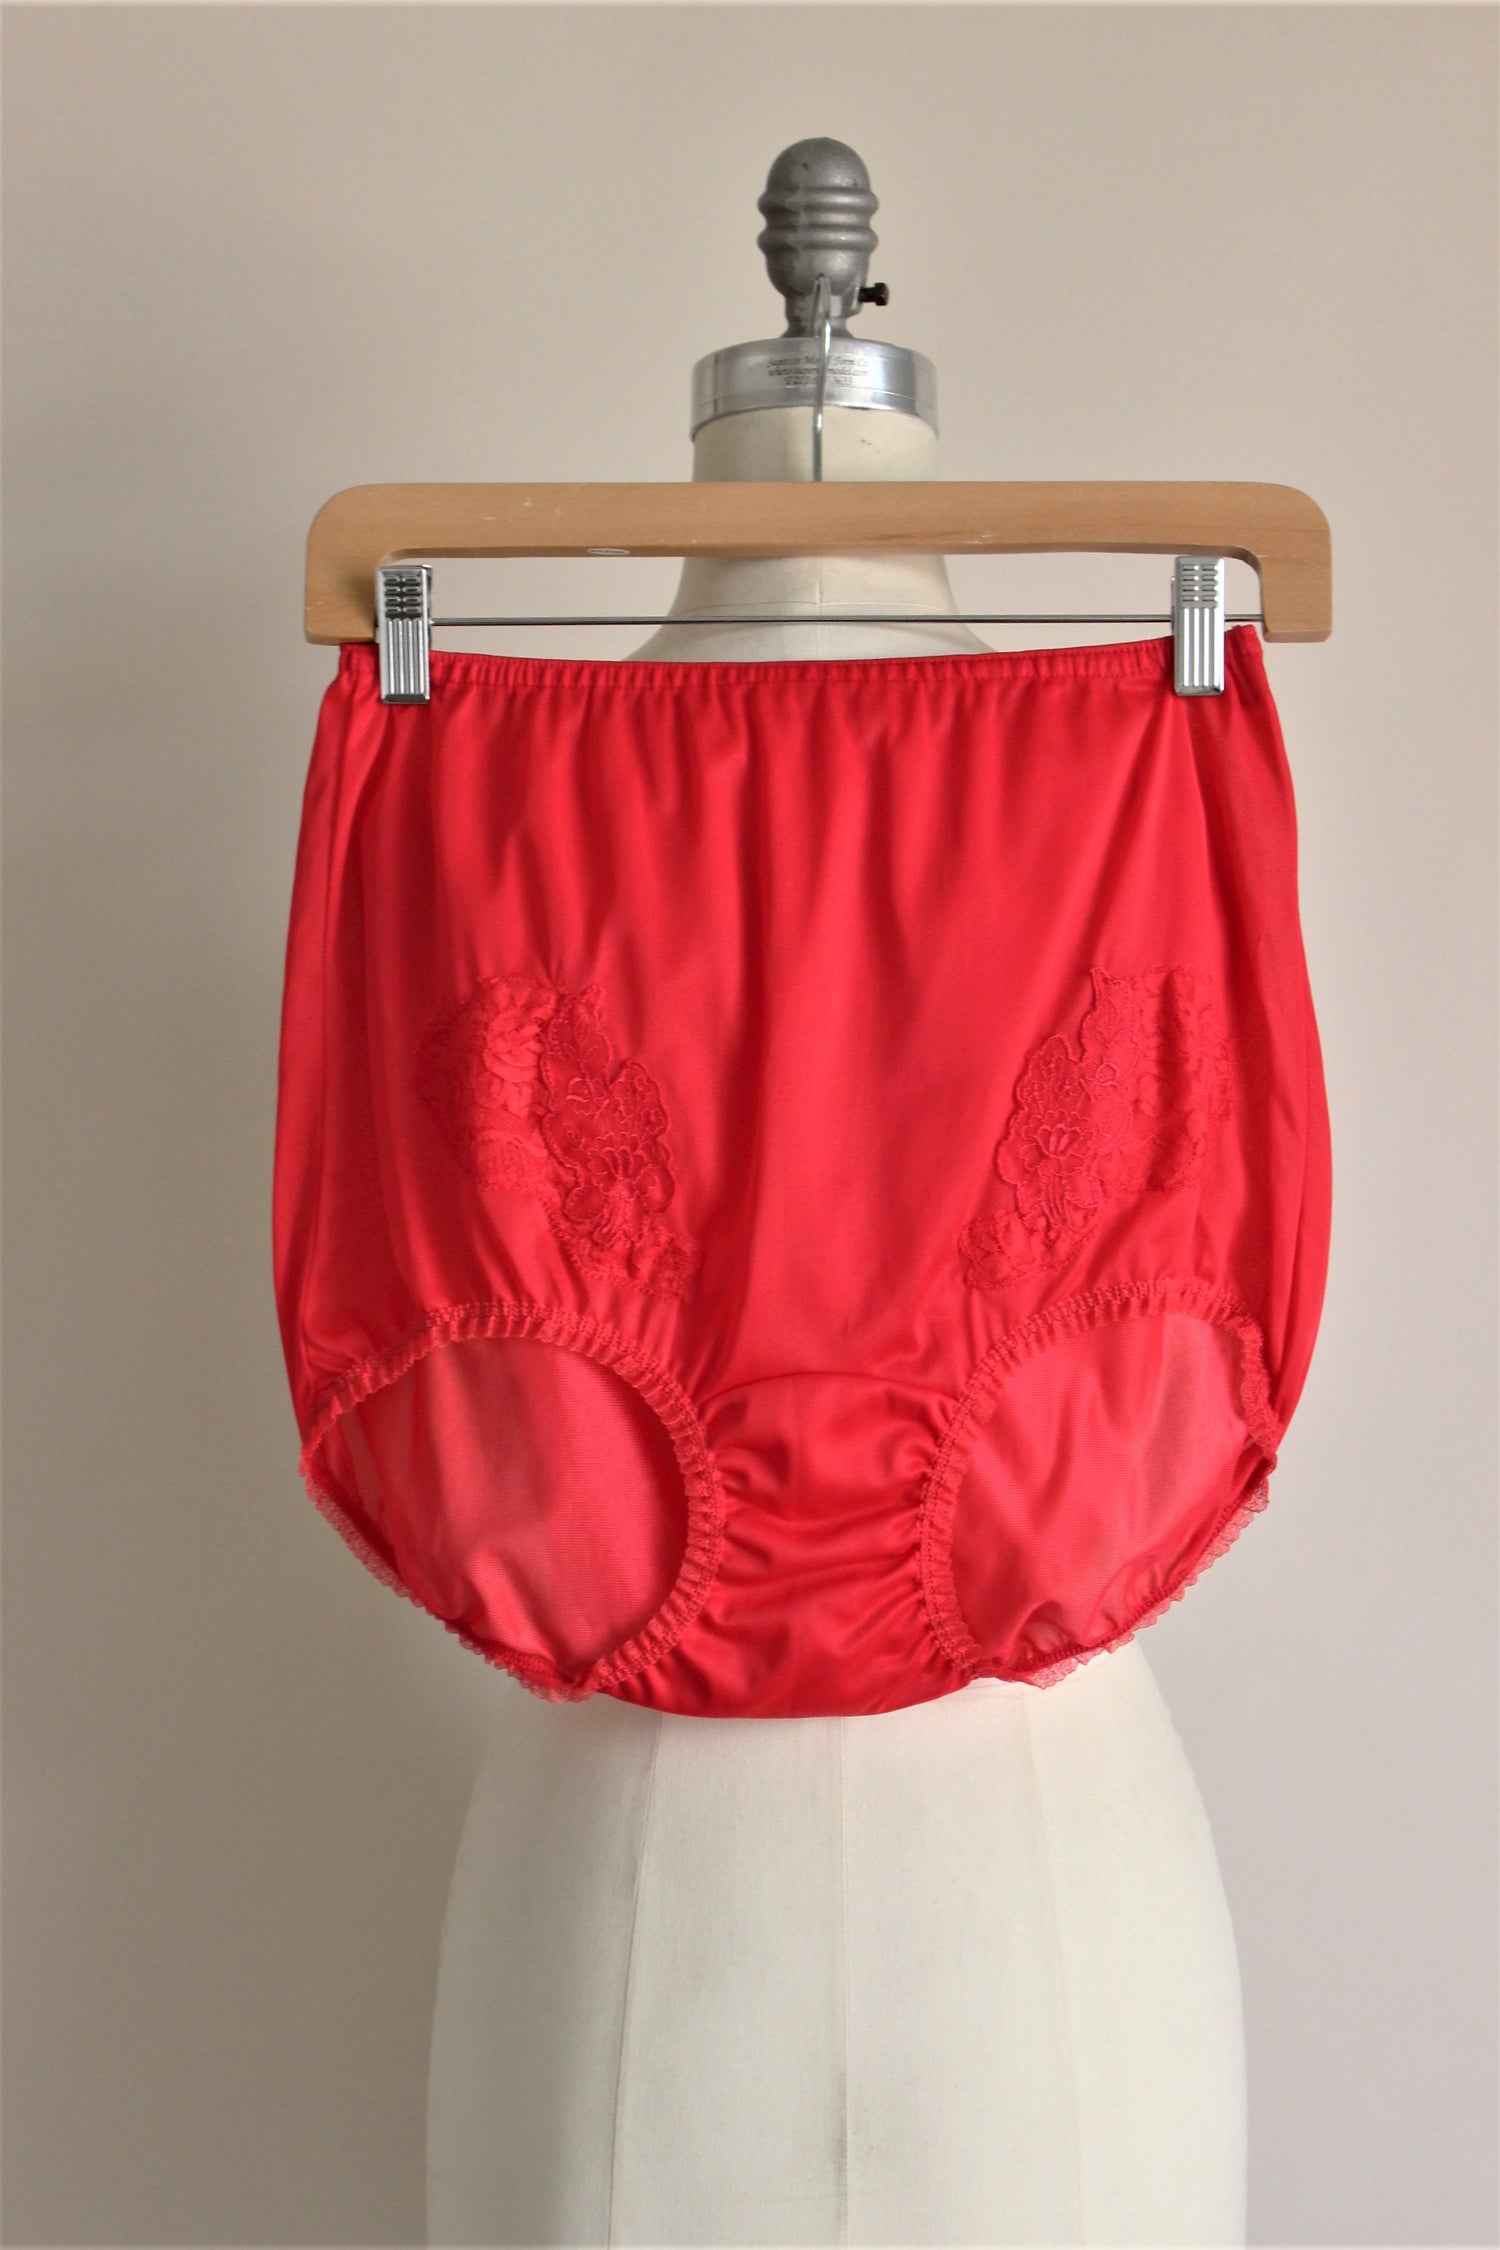 Vintage 1970s JC Penneys Gaymode High Waisted Red Nylon Panty